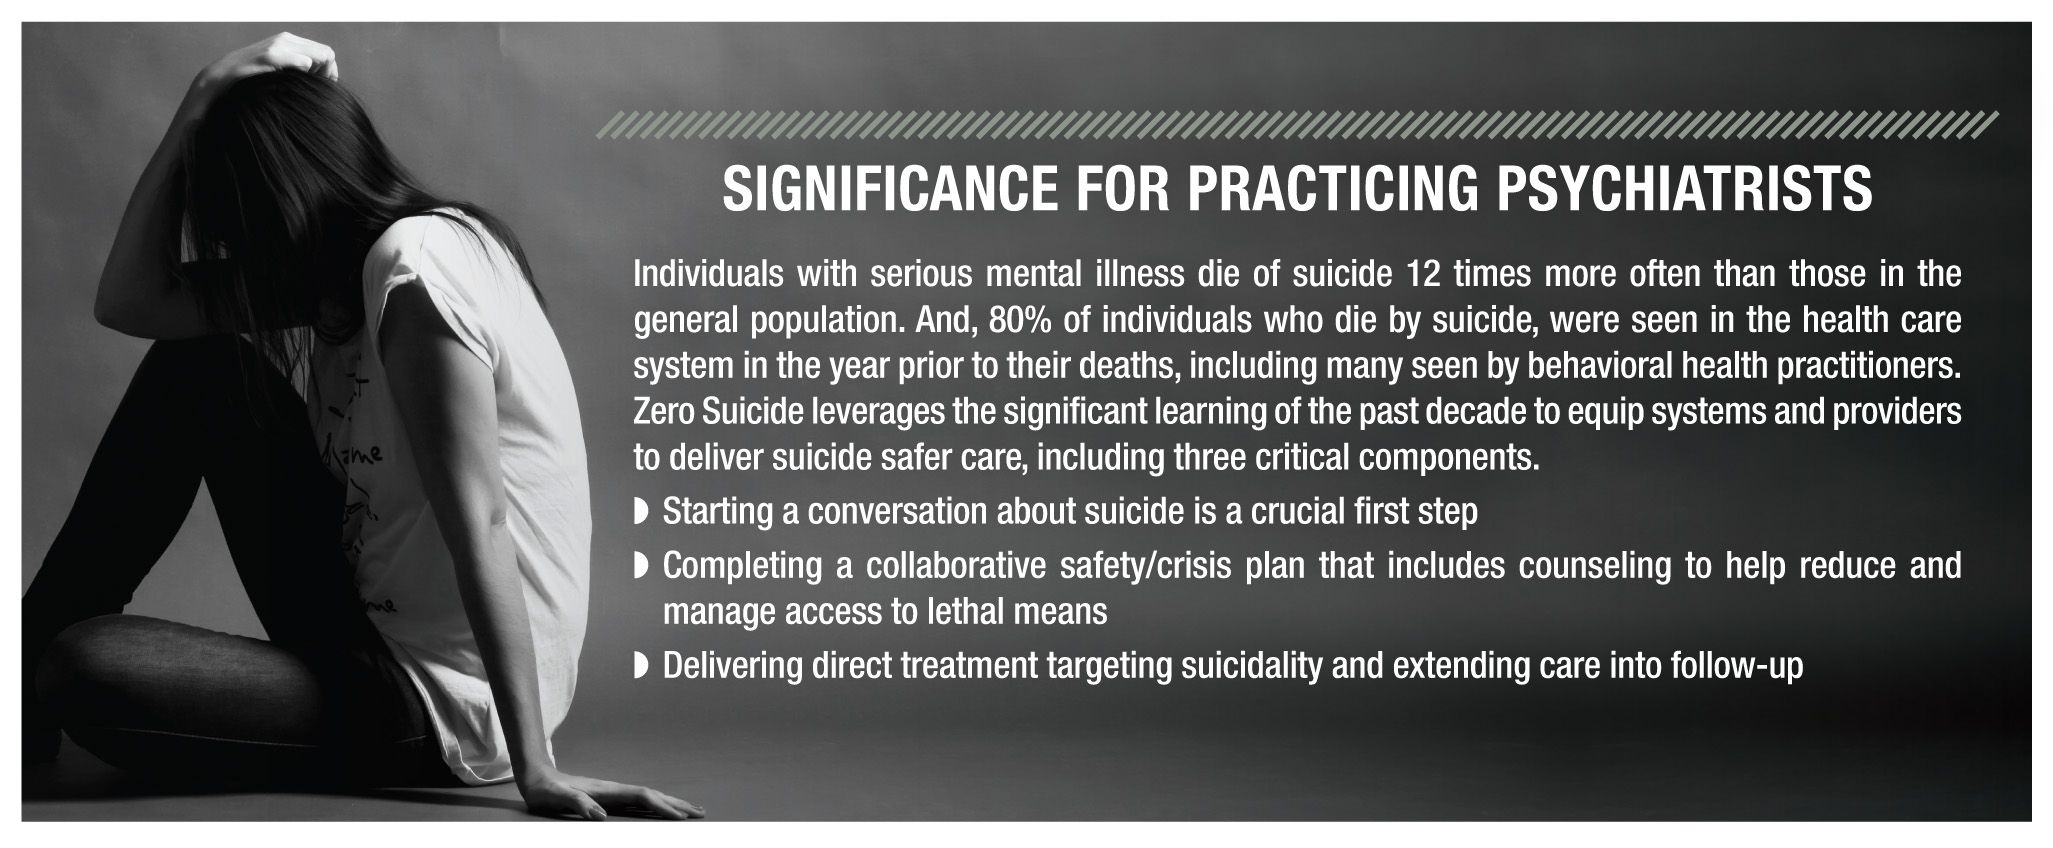 Individuals with serious mental illness die of suicide 12 times more often than those in the general population. 